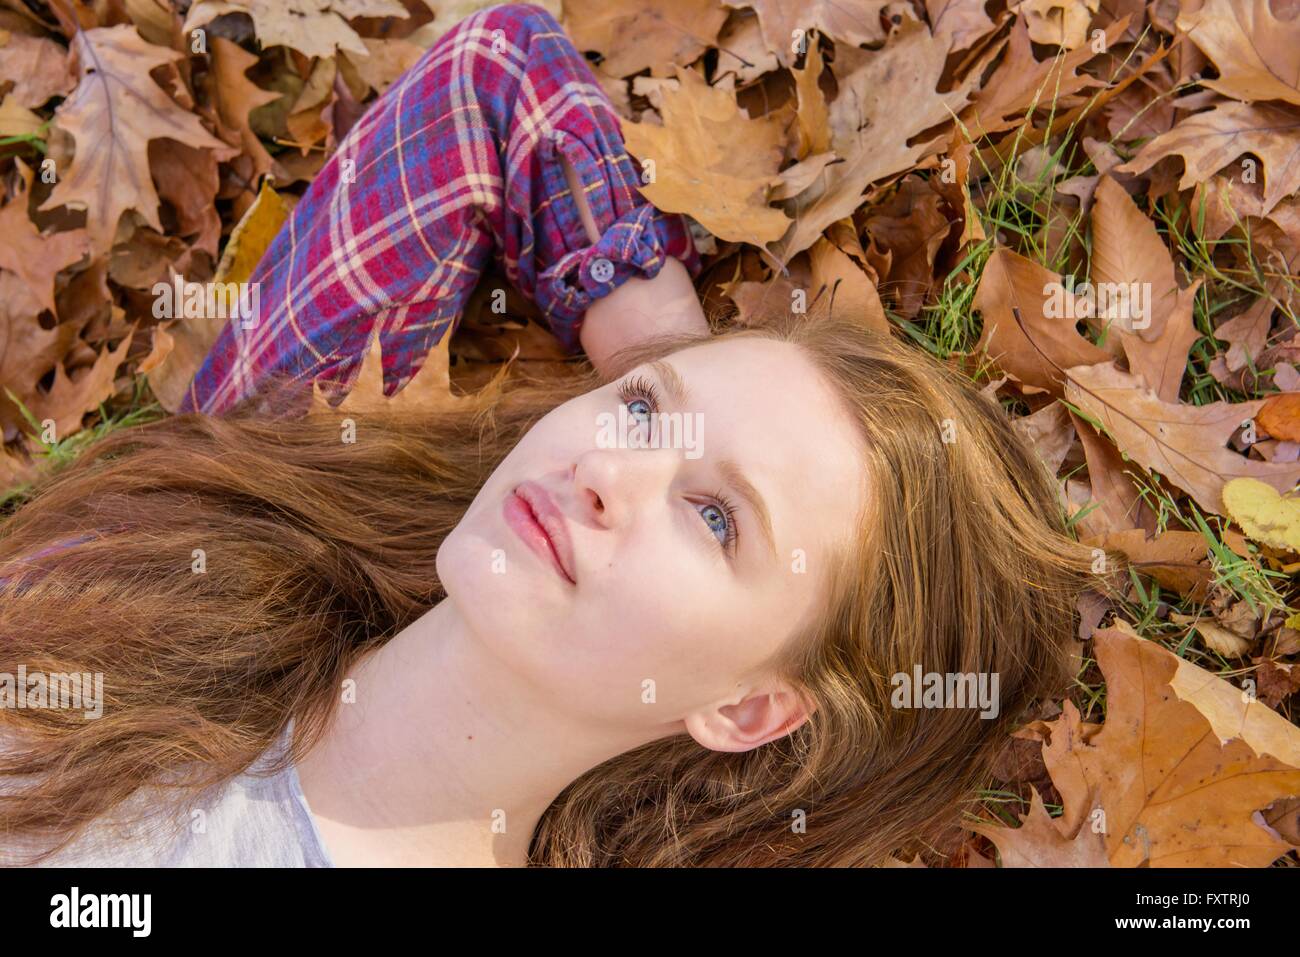 Teenage girl lying on Autumn Leaves, close-up Banque D'Images